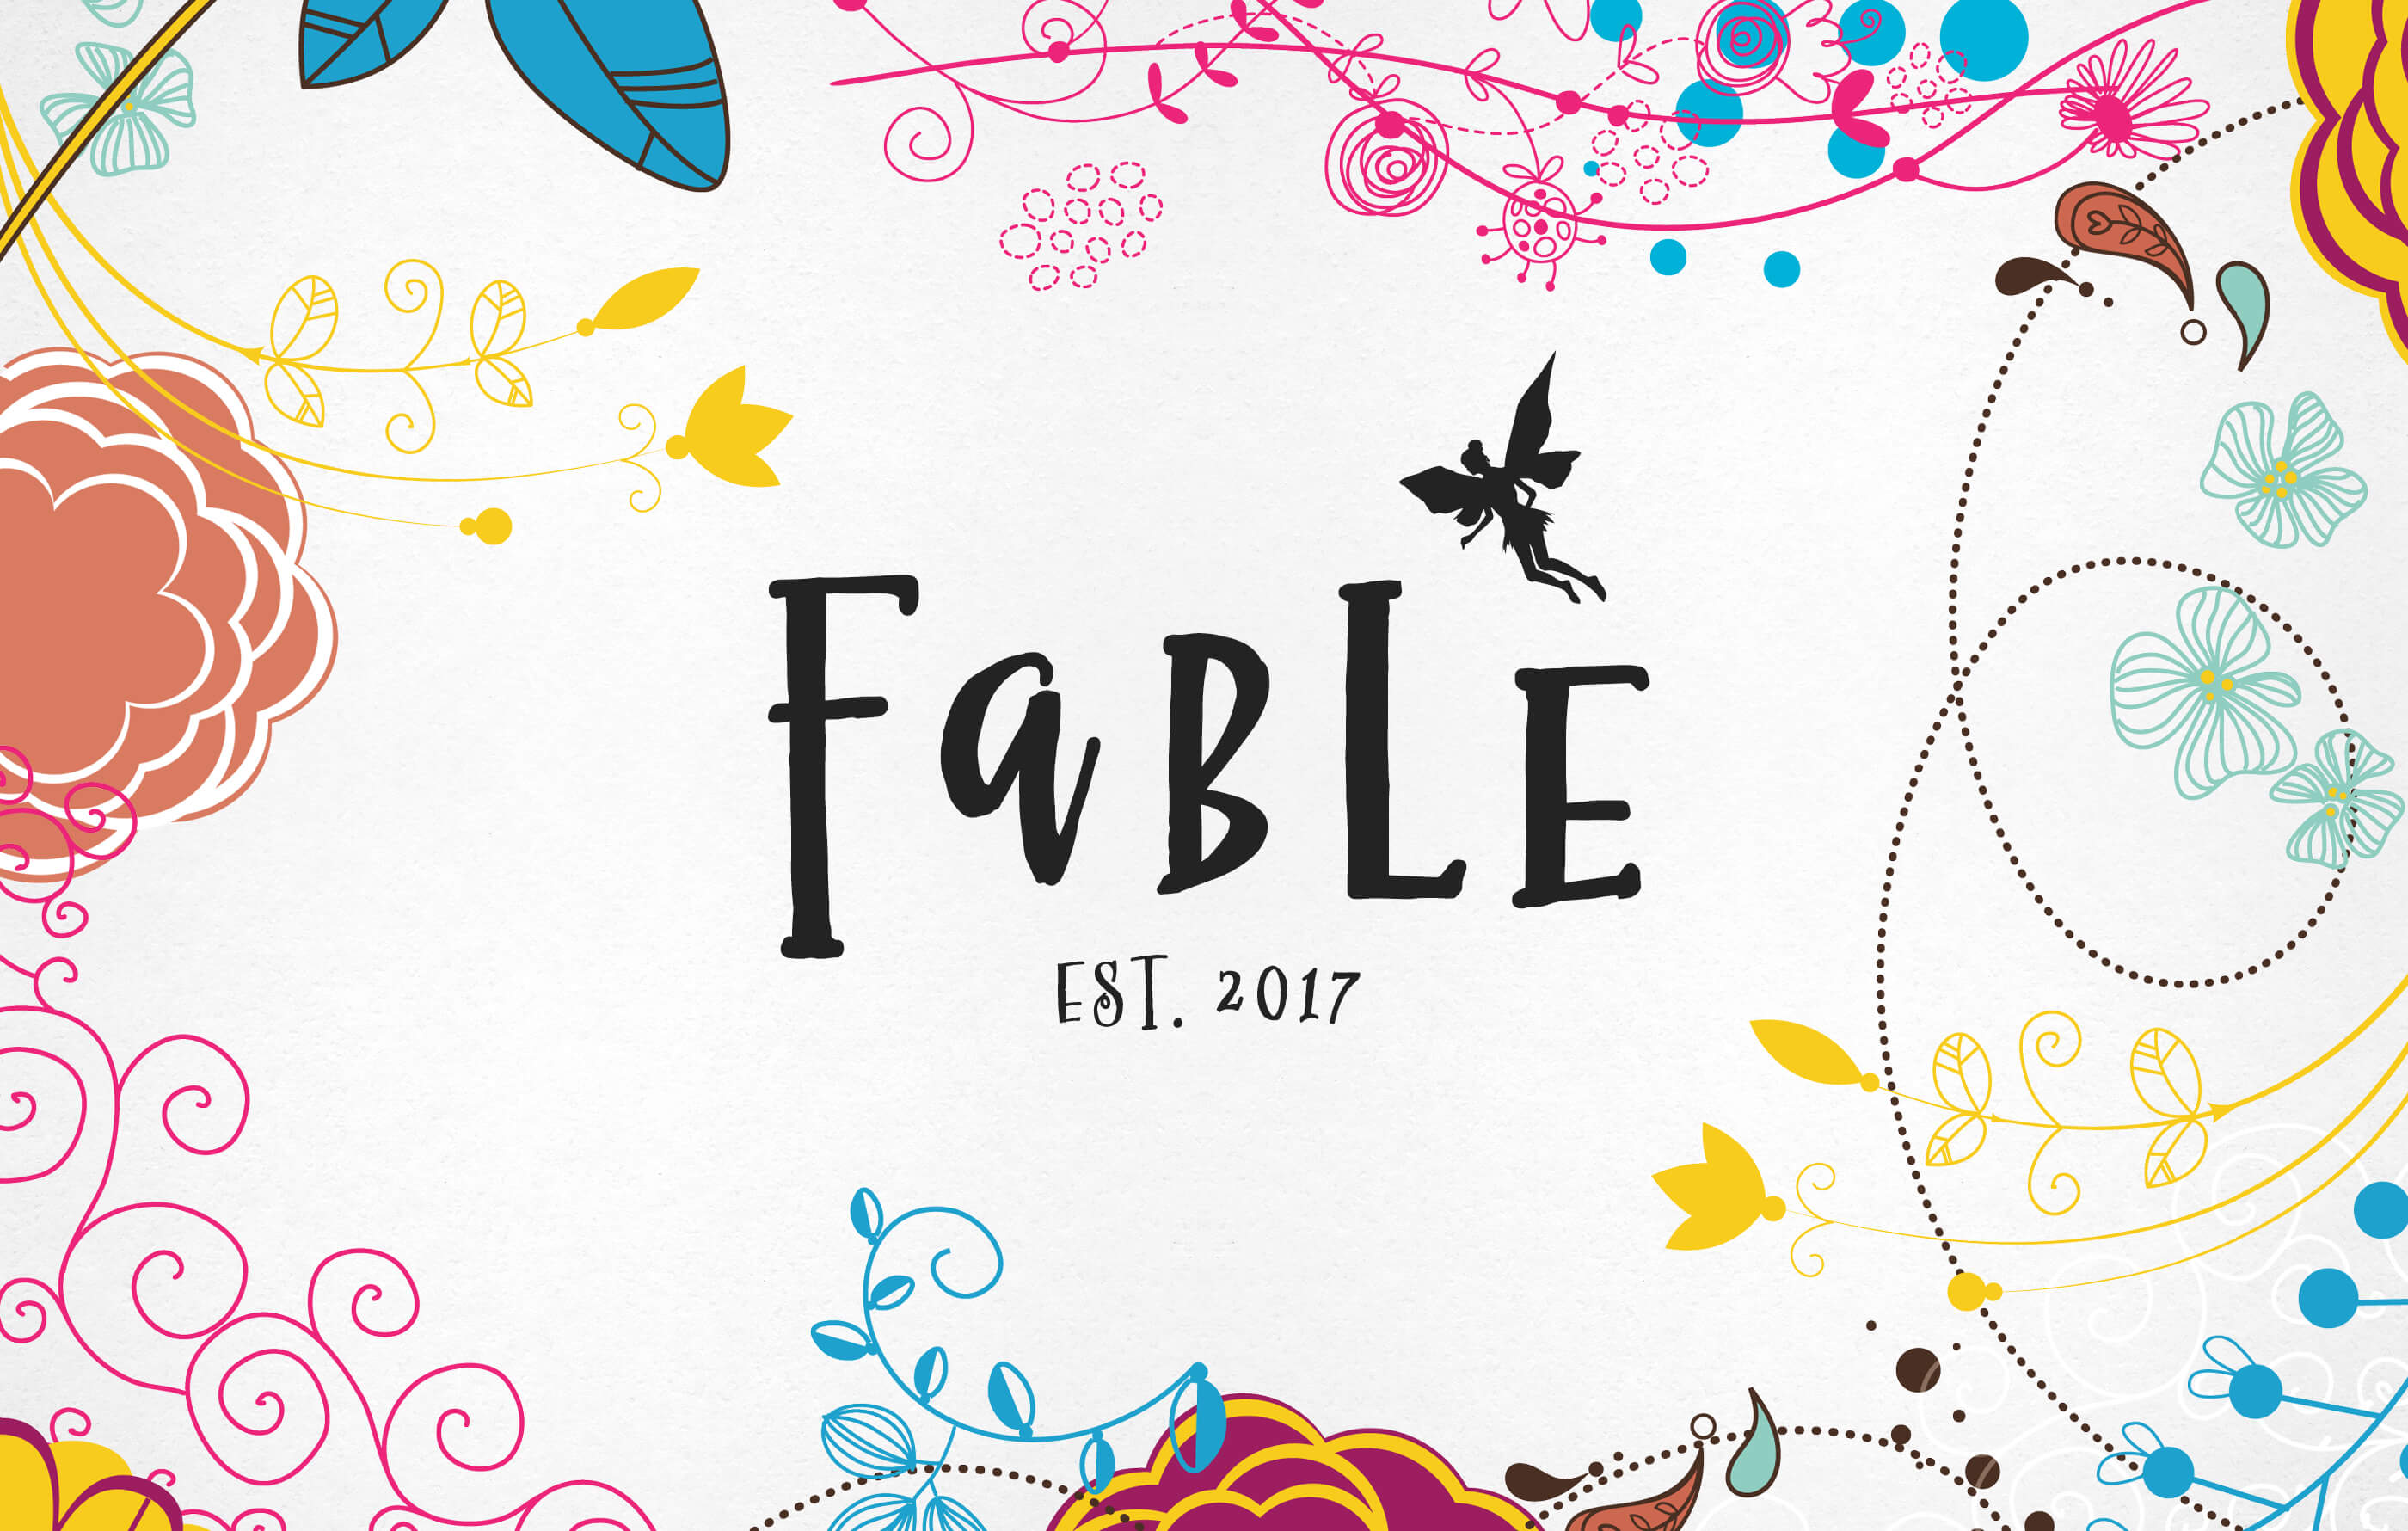 Dark grey Fable logo written in a hand-drawn, rough font with an icon of a fairy hovering above the letters